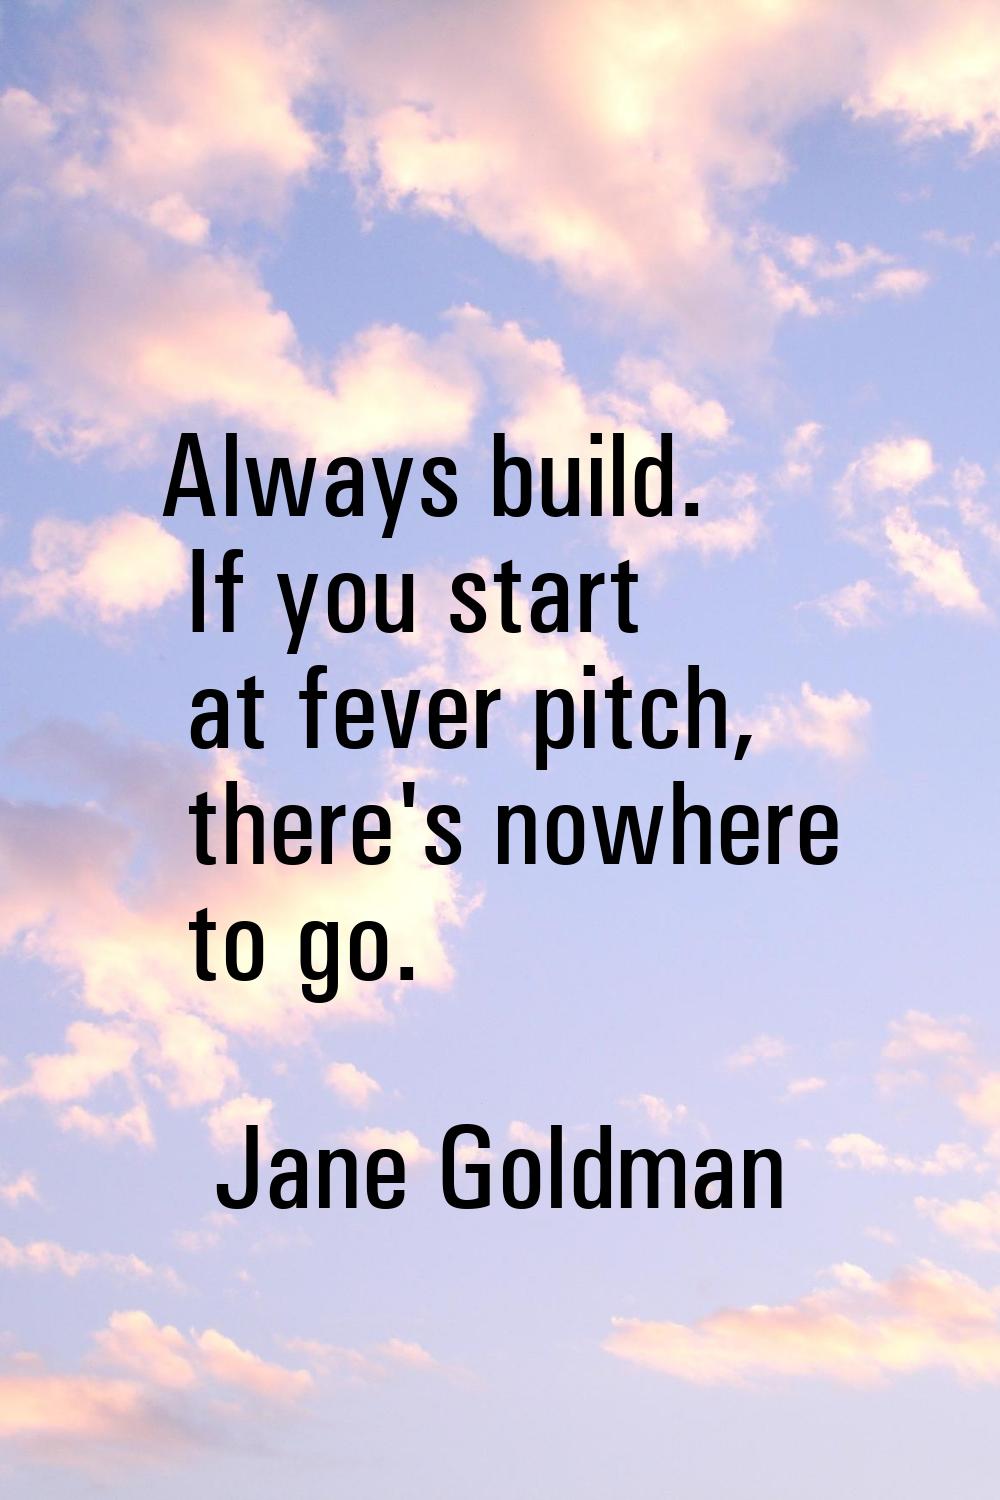 Always build. If you start at fever pitch, there's nowhere to go.